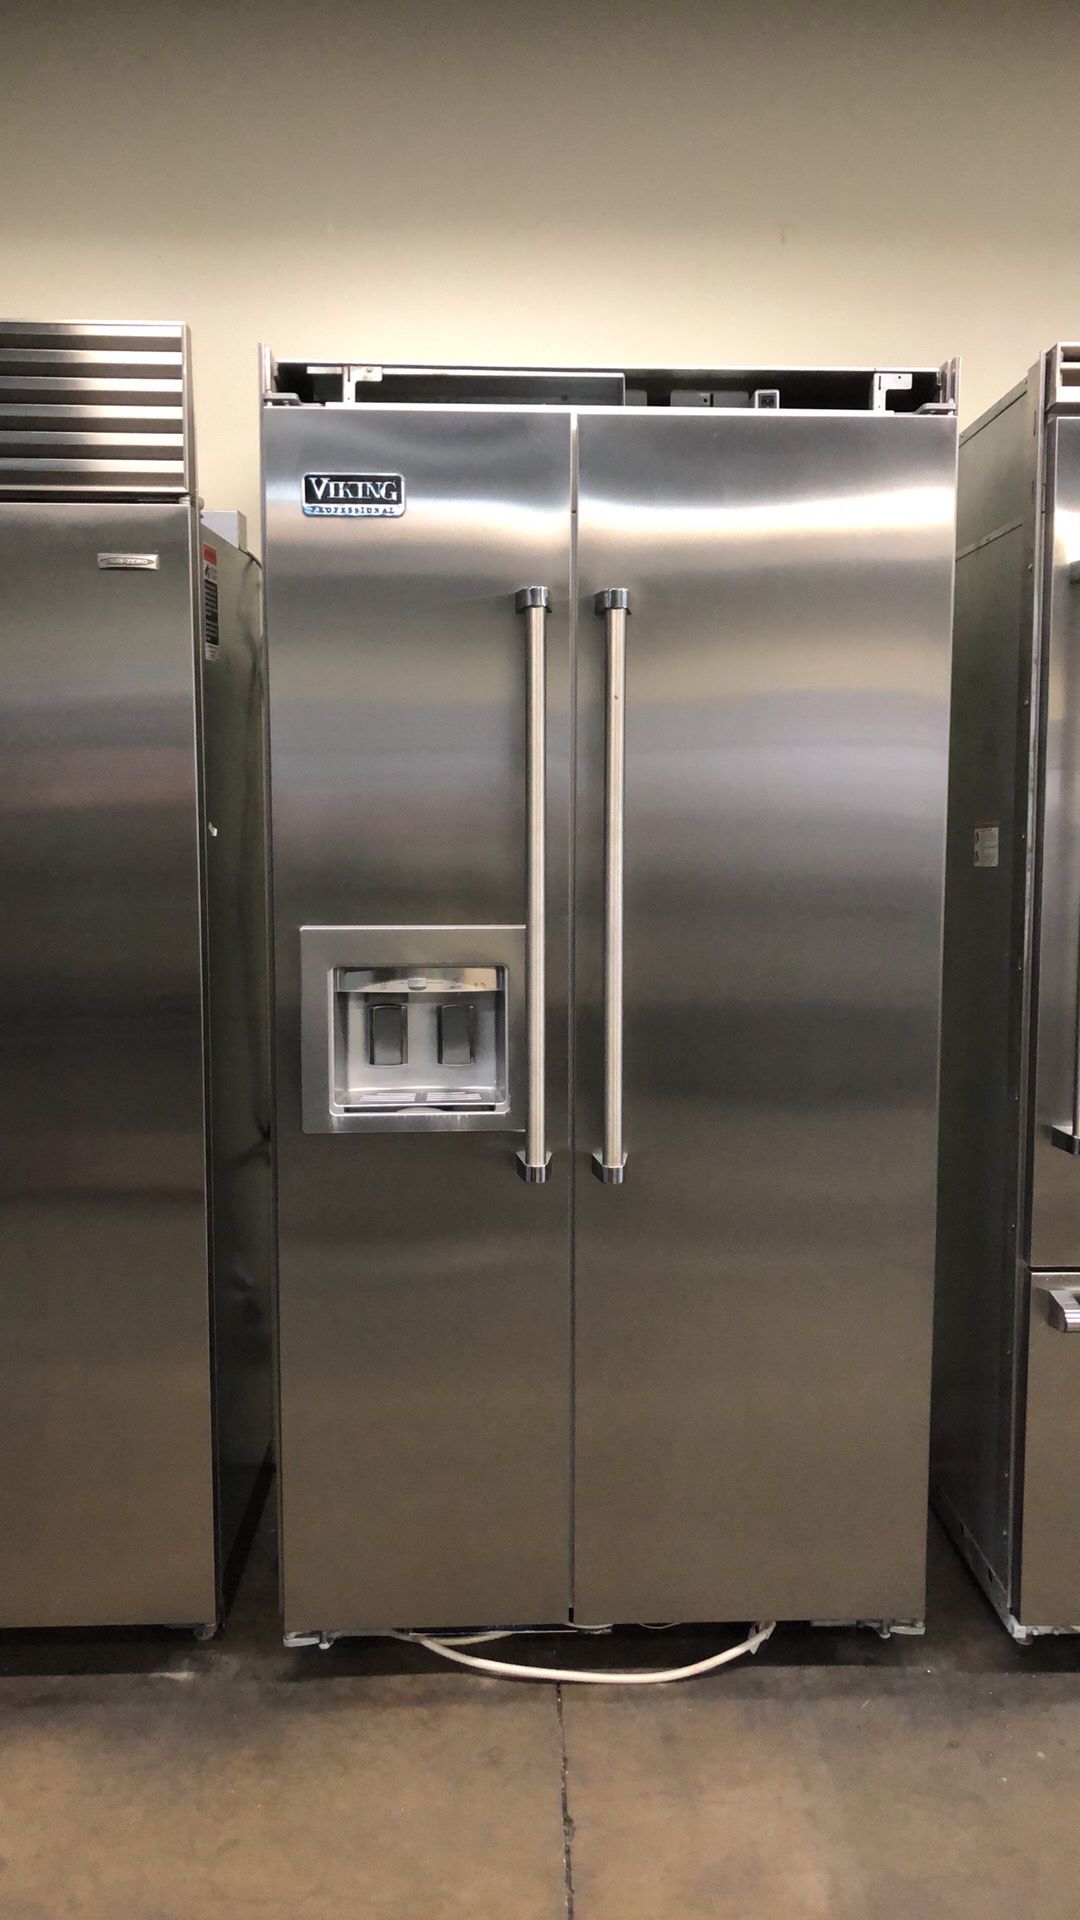 Viking 42”wide Built In Side By Side Refrigerator In Stainless Steel 